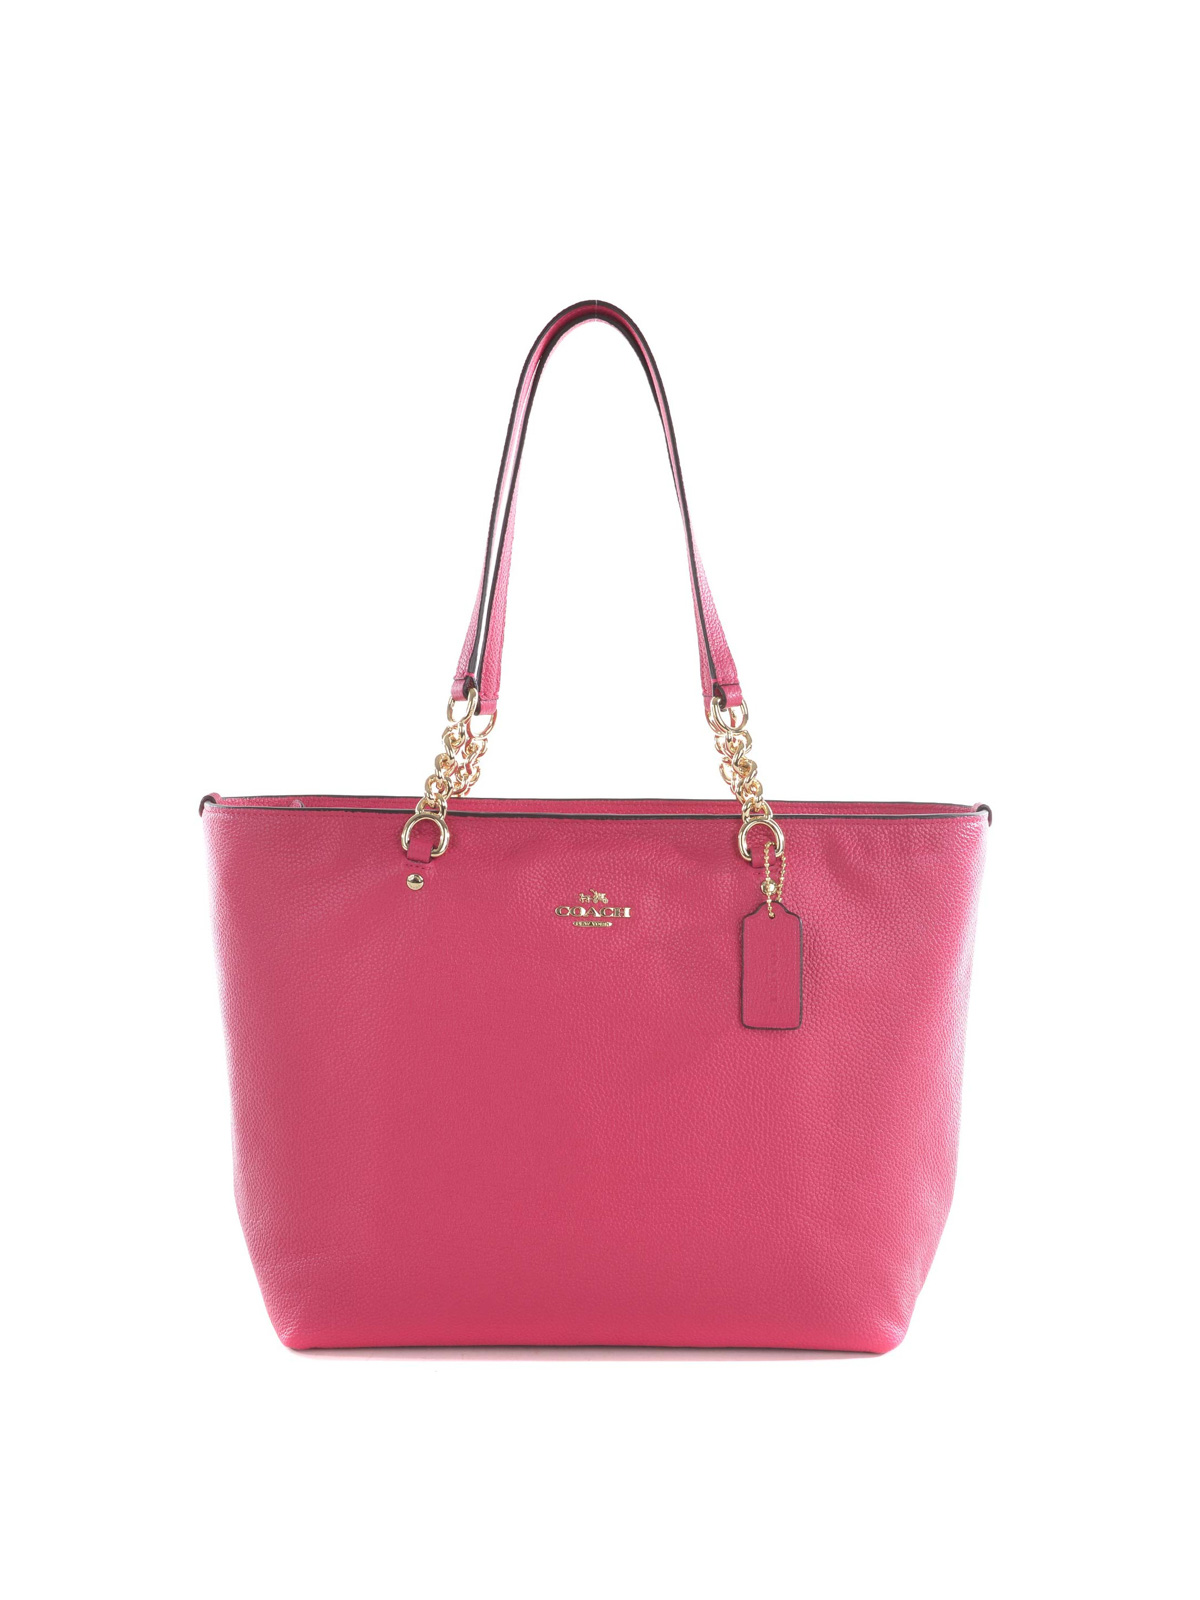 Coach - Sophia tote - totes bags - 36600LICERISE | Shop online at iKRIX